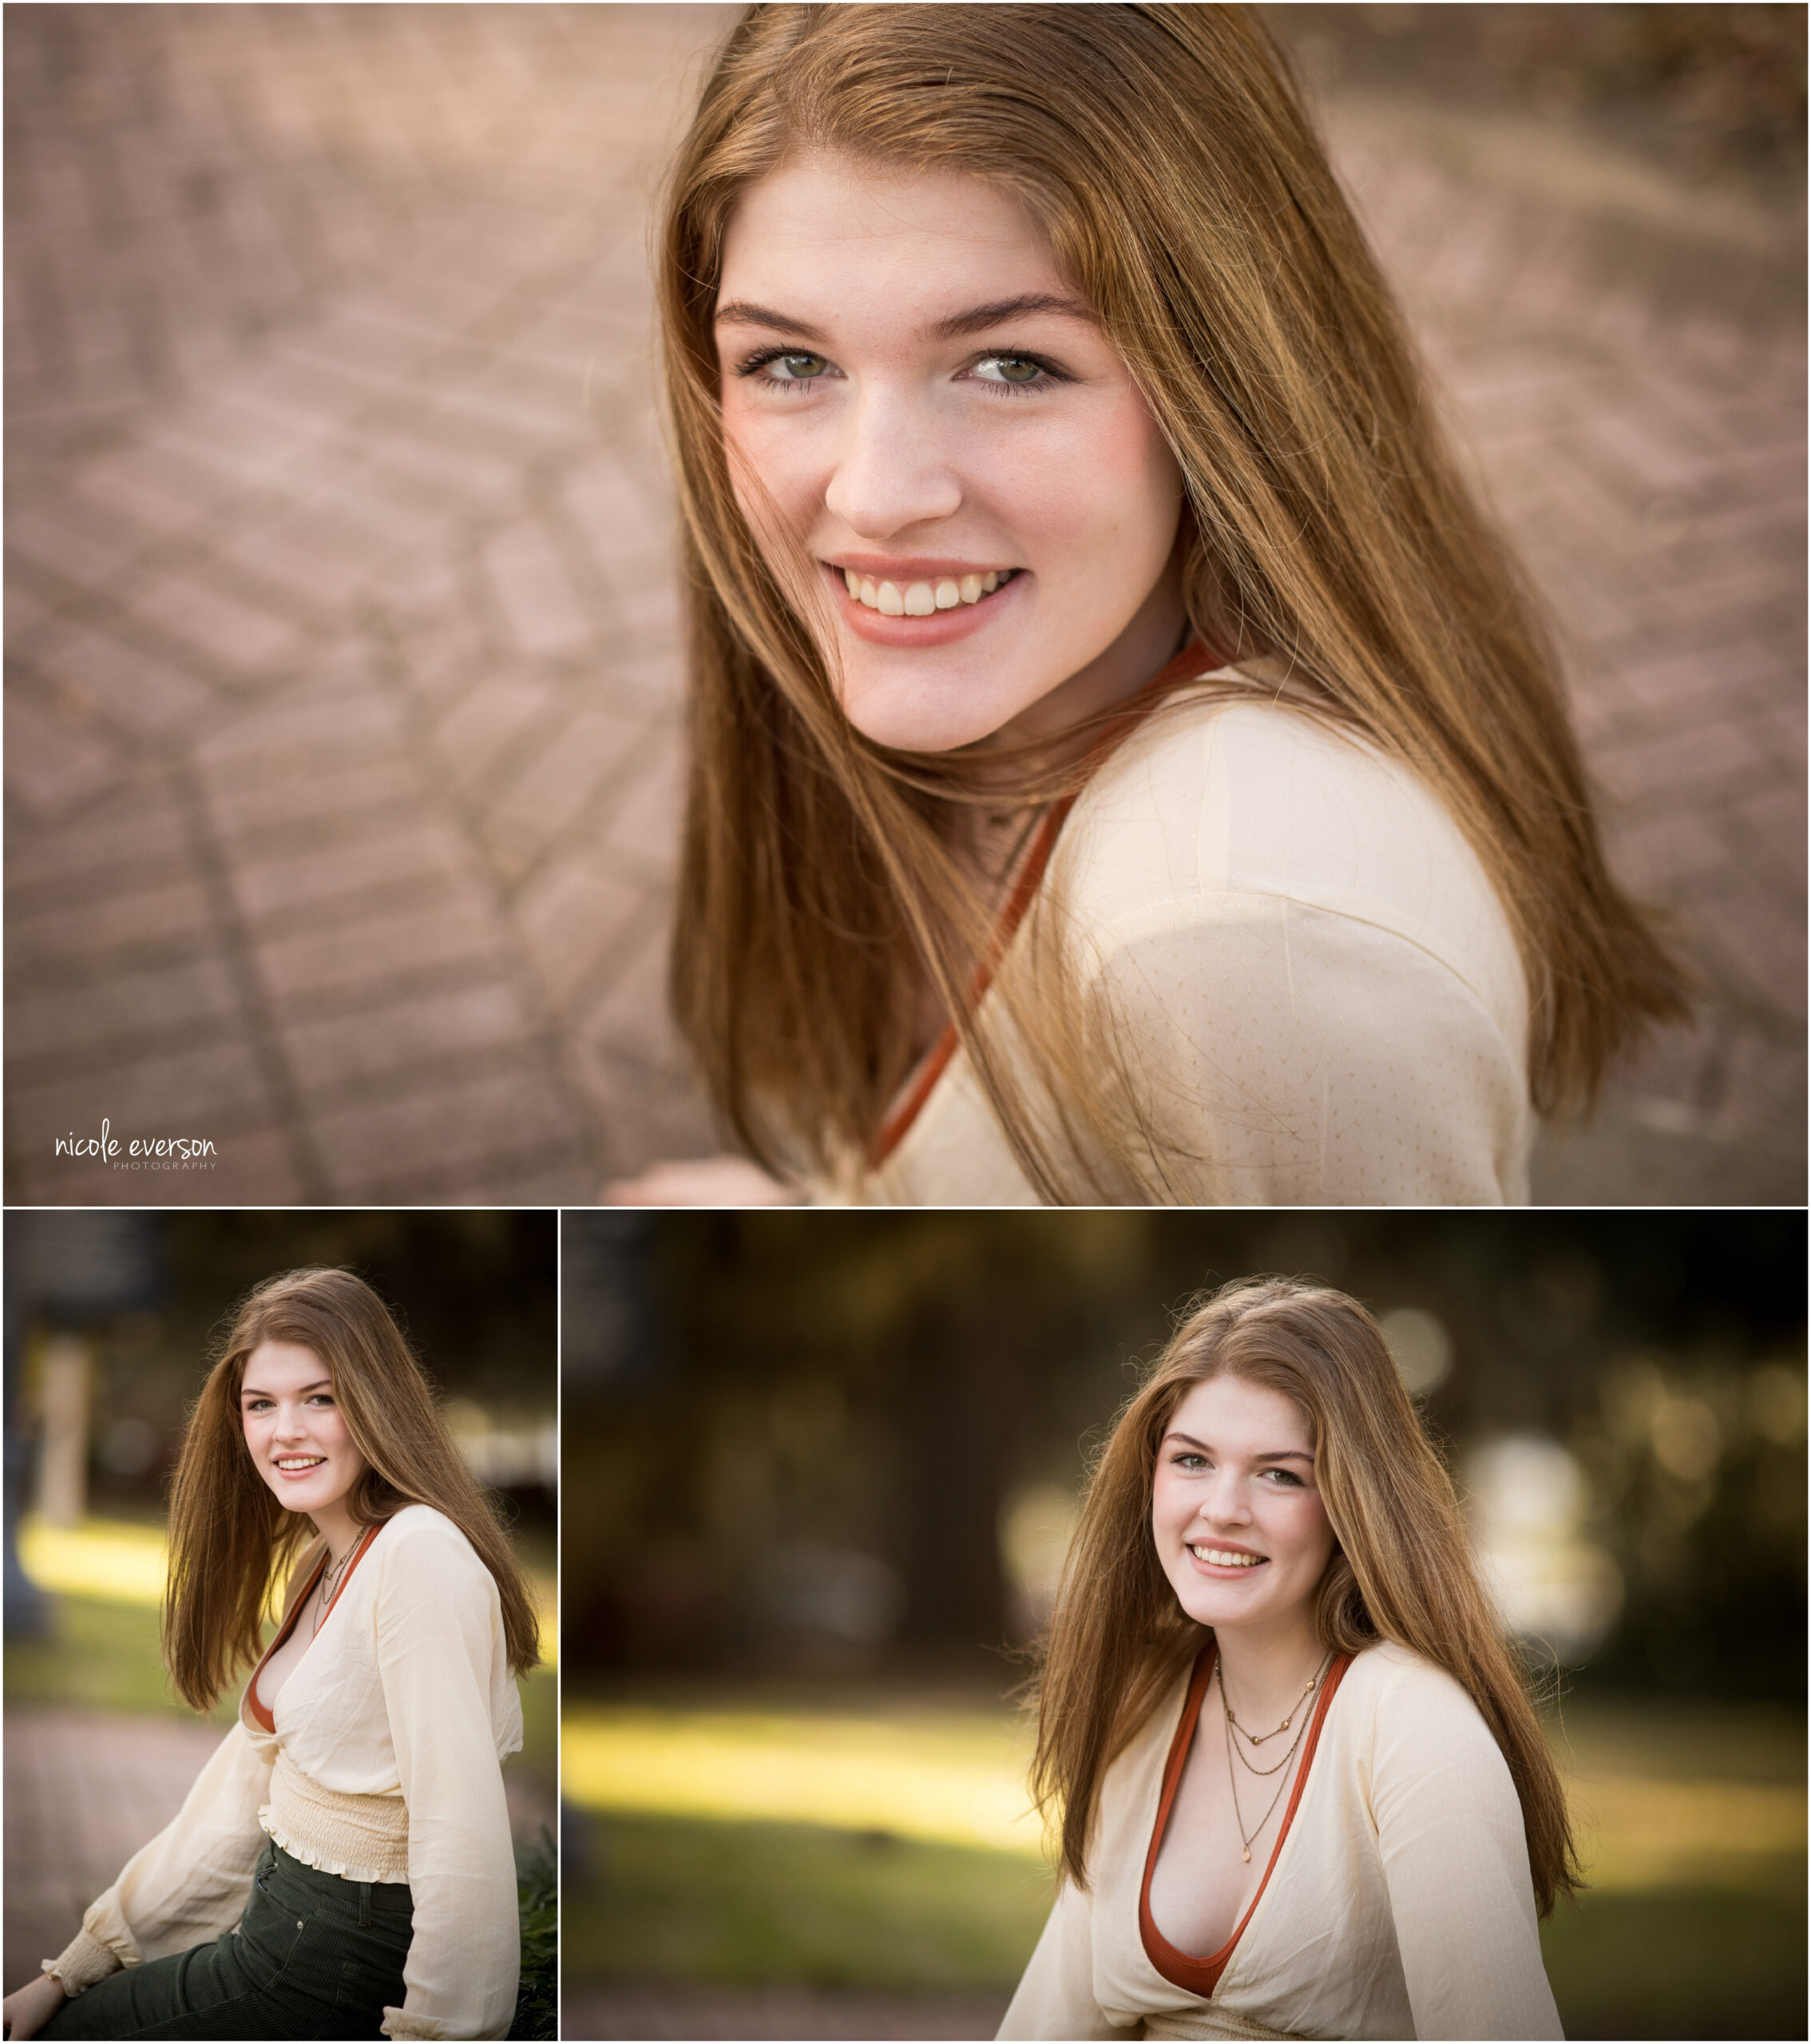 Nicole Everson Photography is Tallahassees best senior photographer